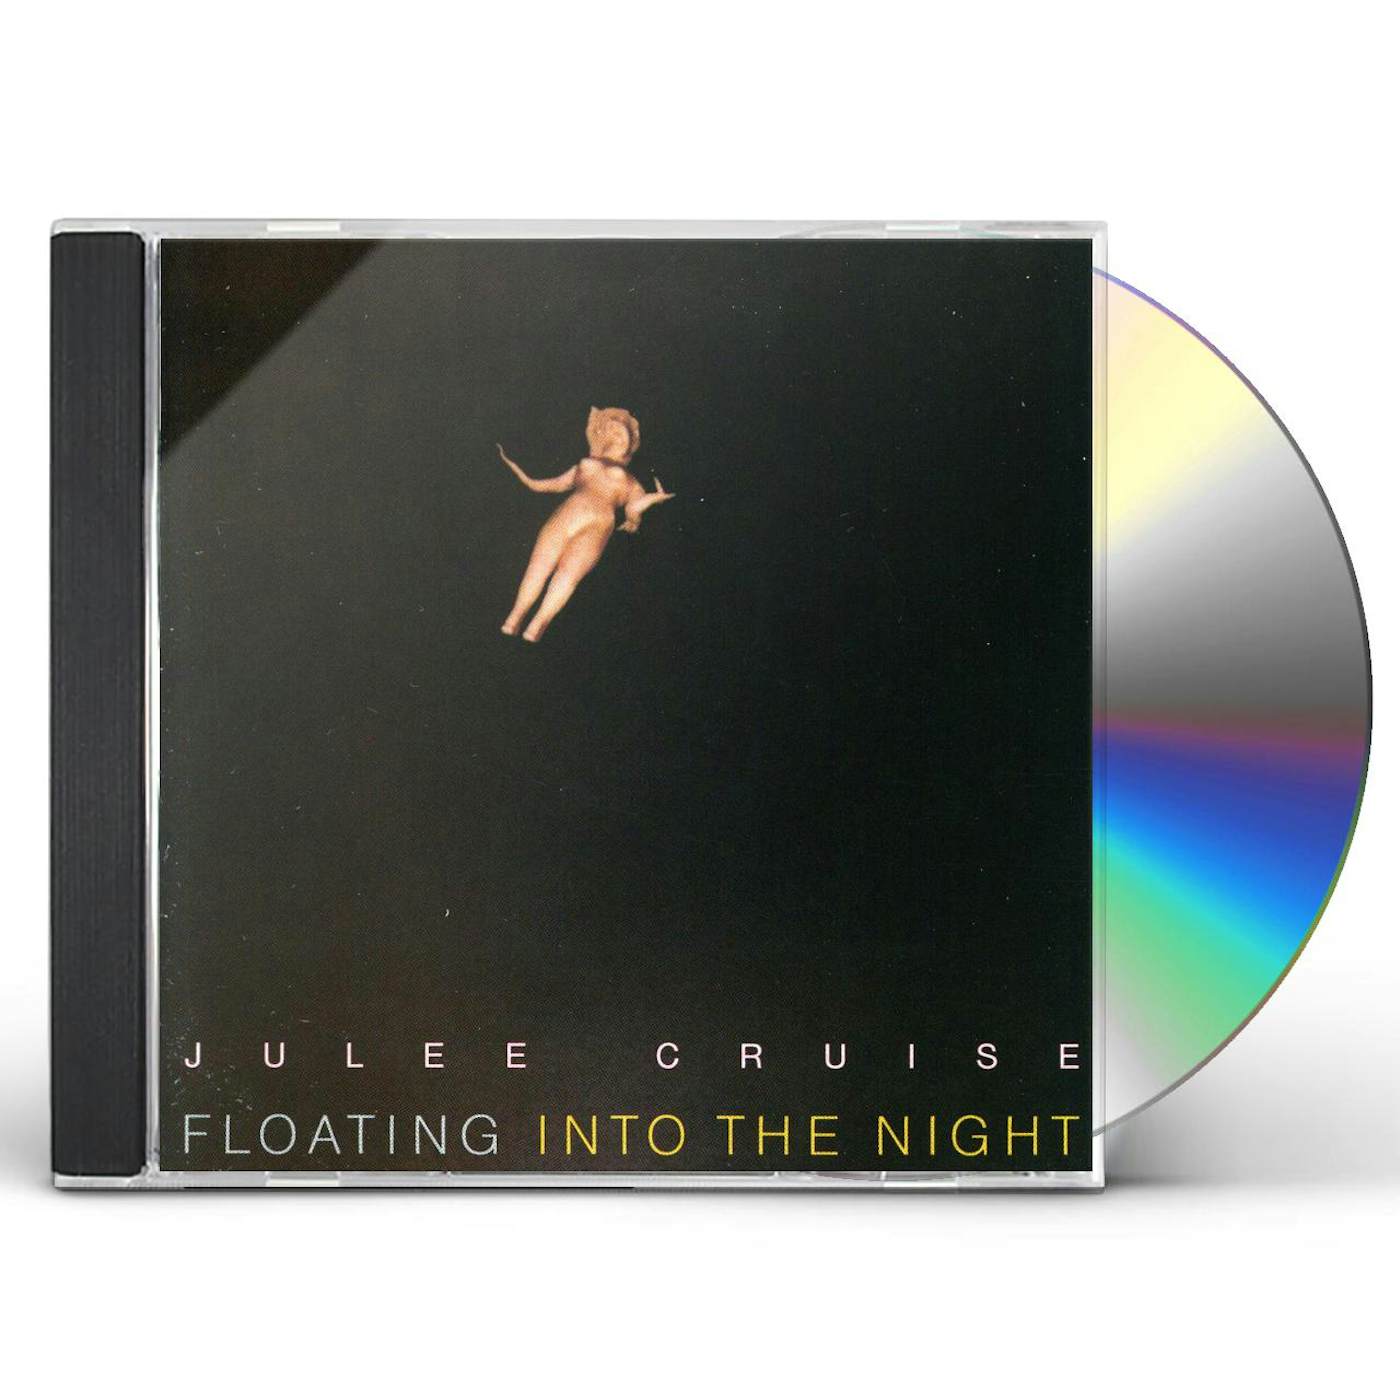 Julee Cruise FLOATING INTO THE NIGHT CD